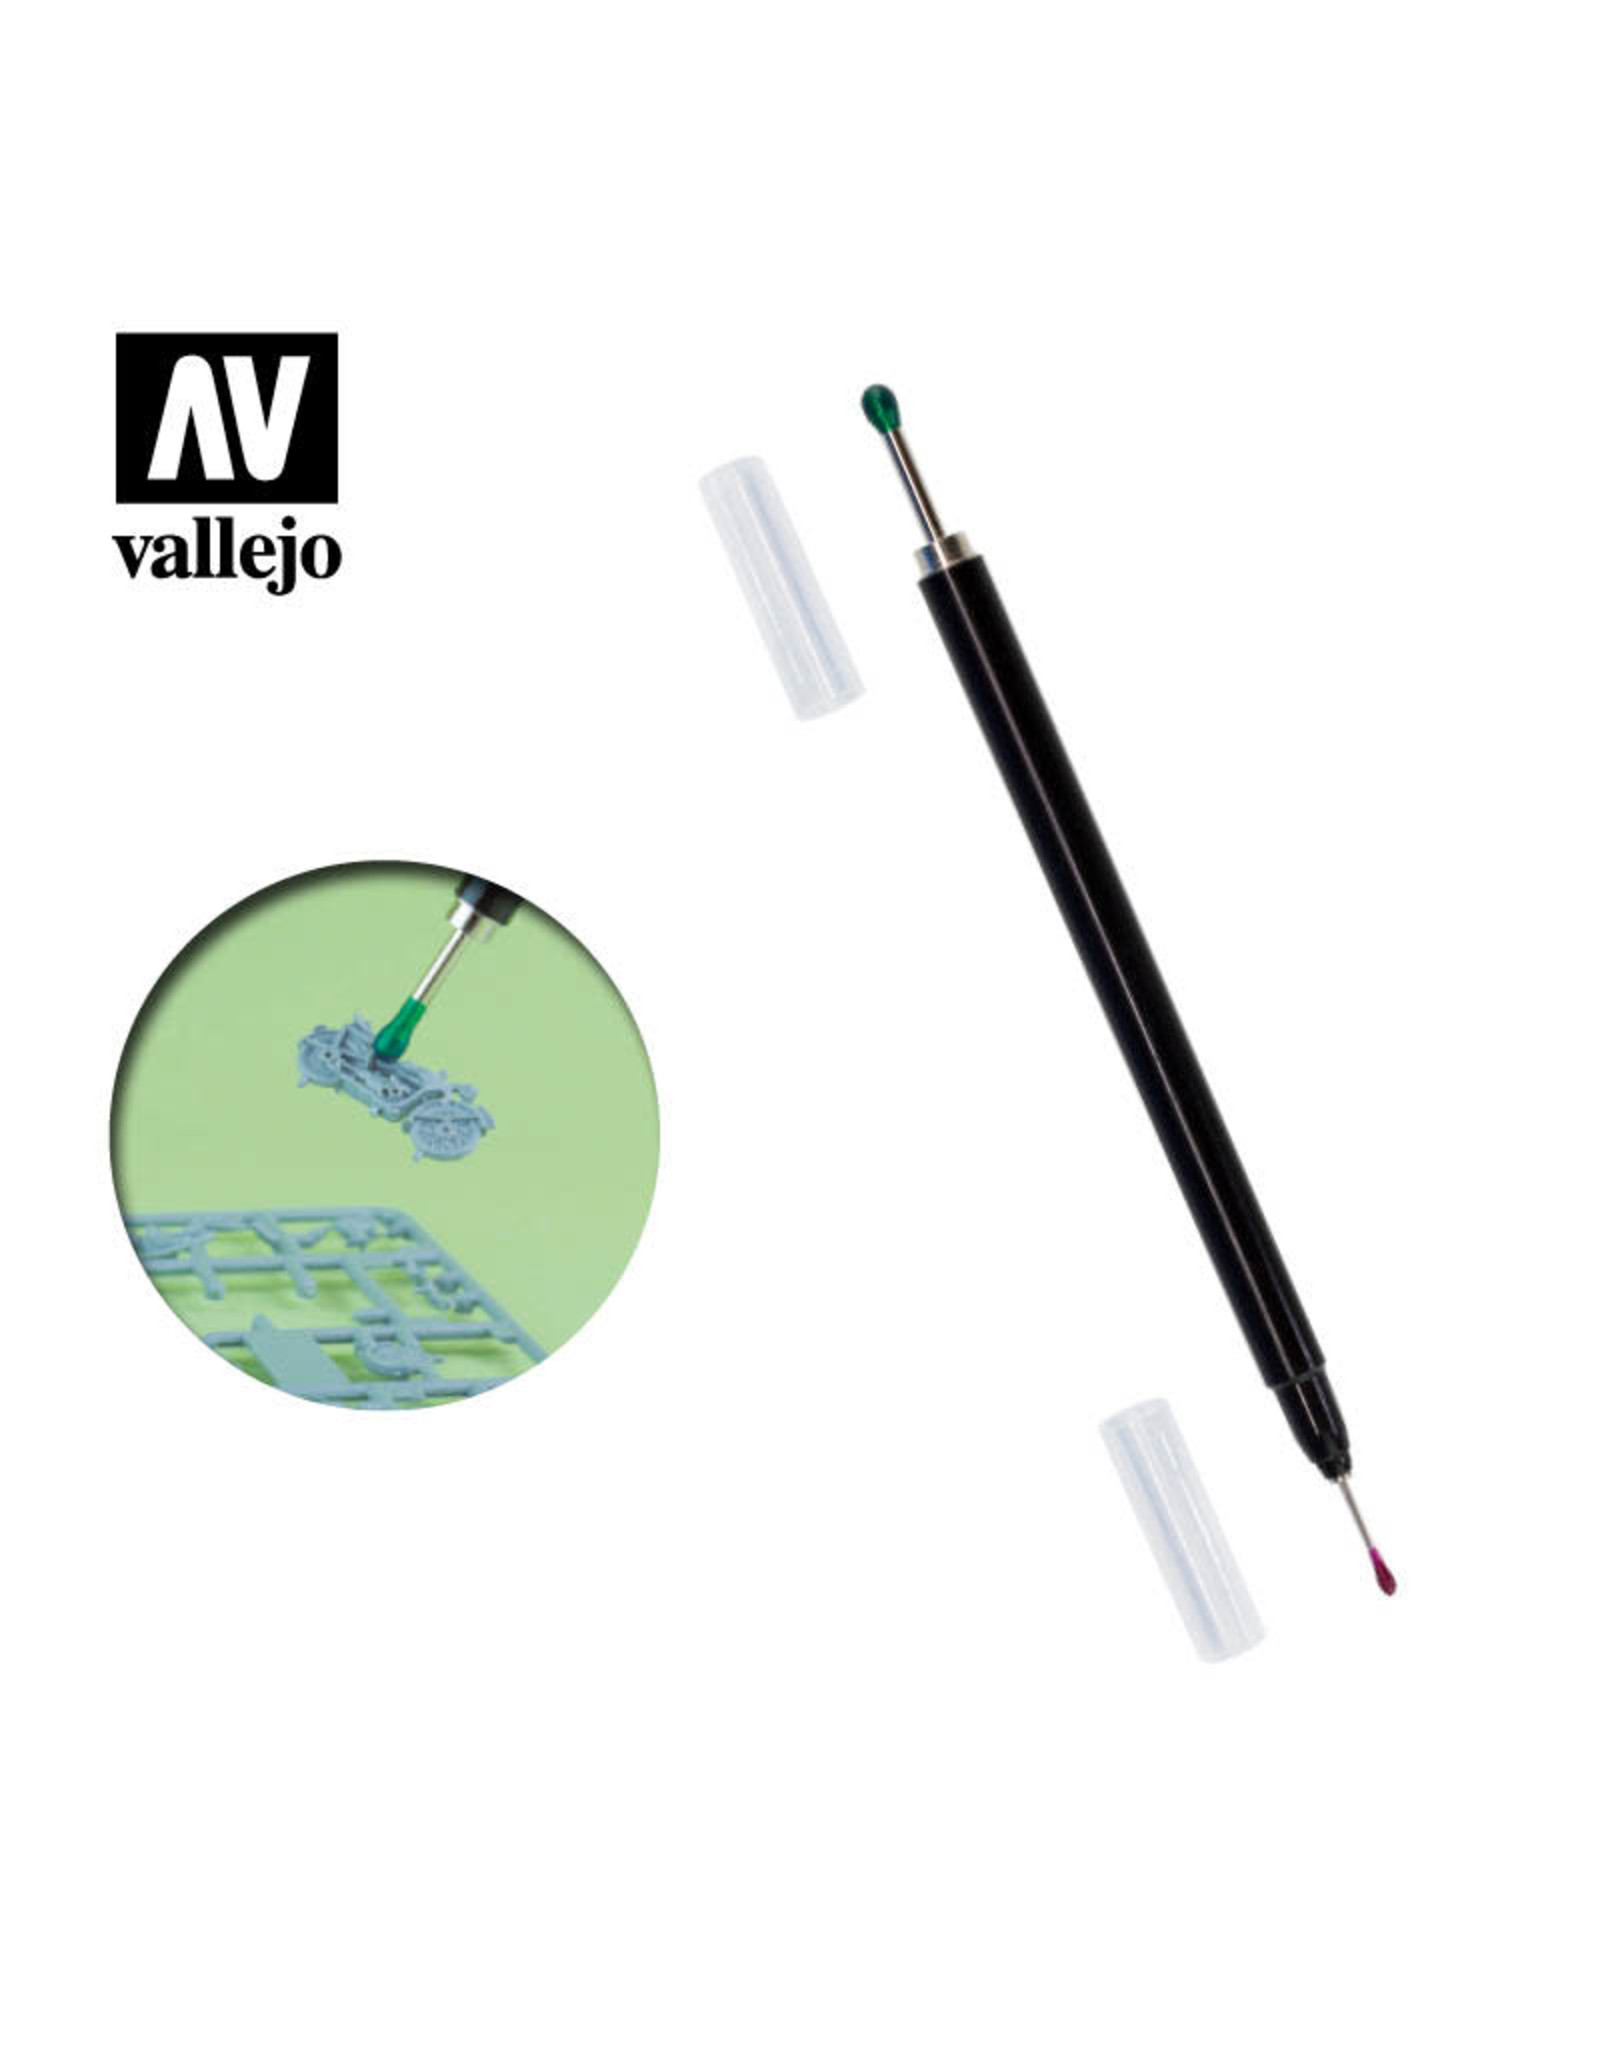 Vallejo Tool: Pick & Place Double Ended Tool